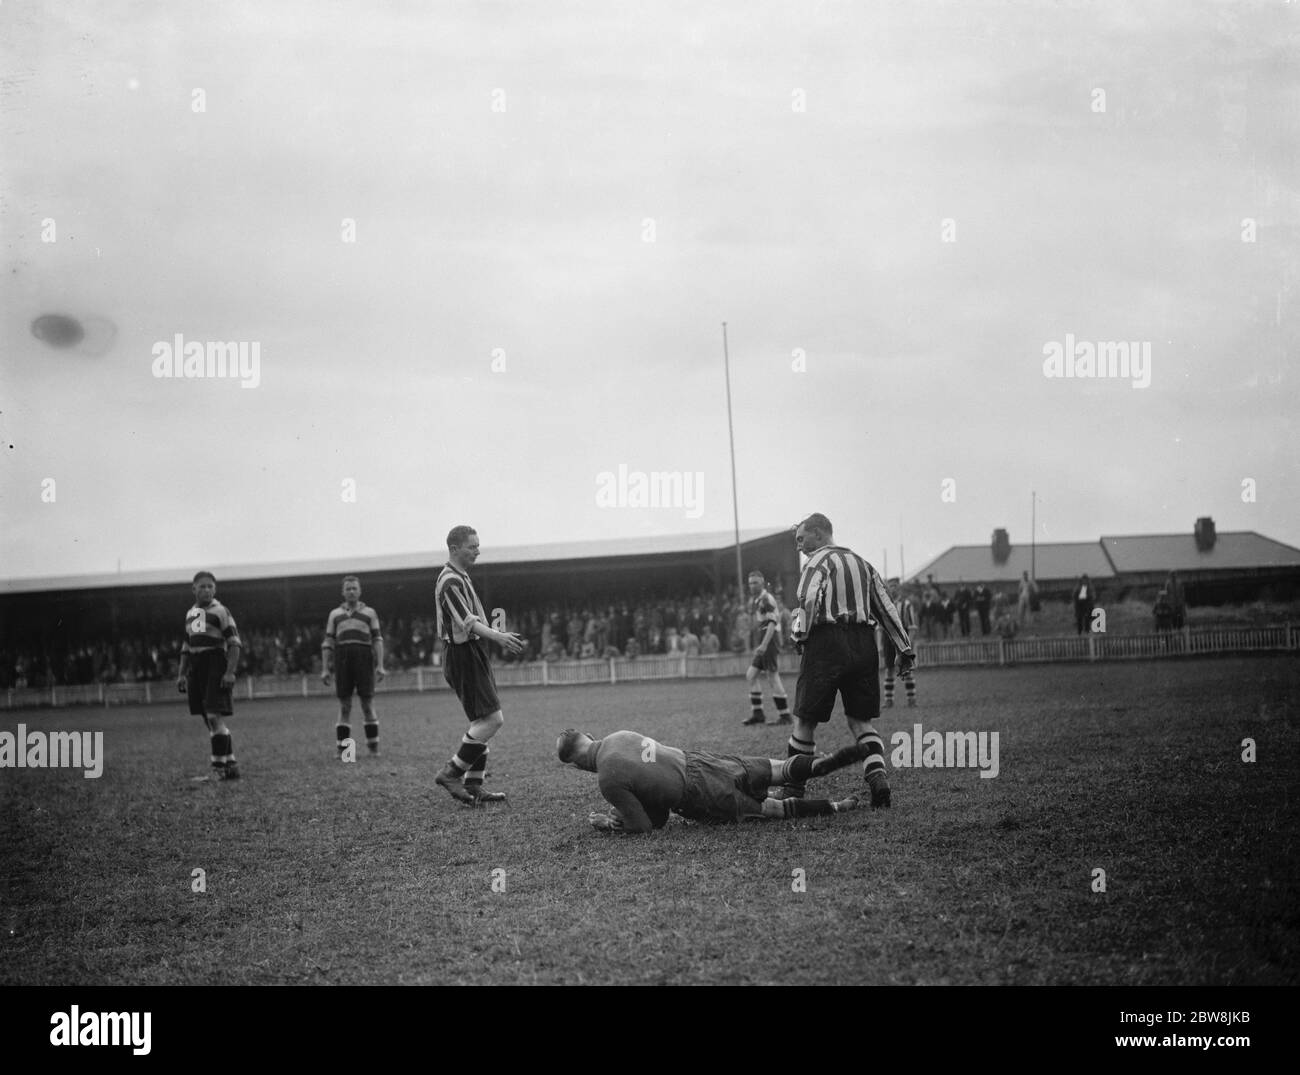 Dartford - Trial match - Red and whites v black and whites - 21/08/37 1937 Stock Photo